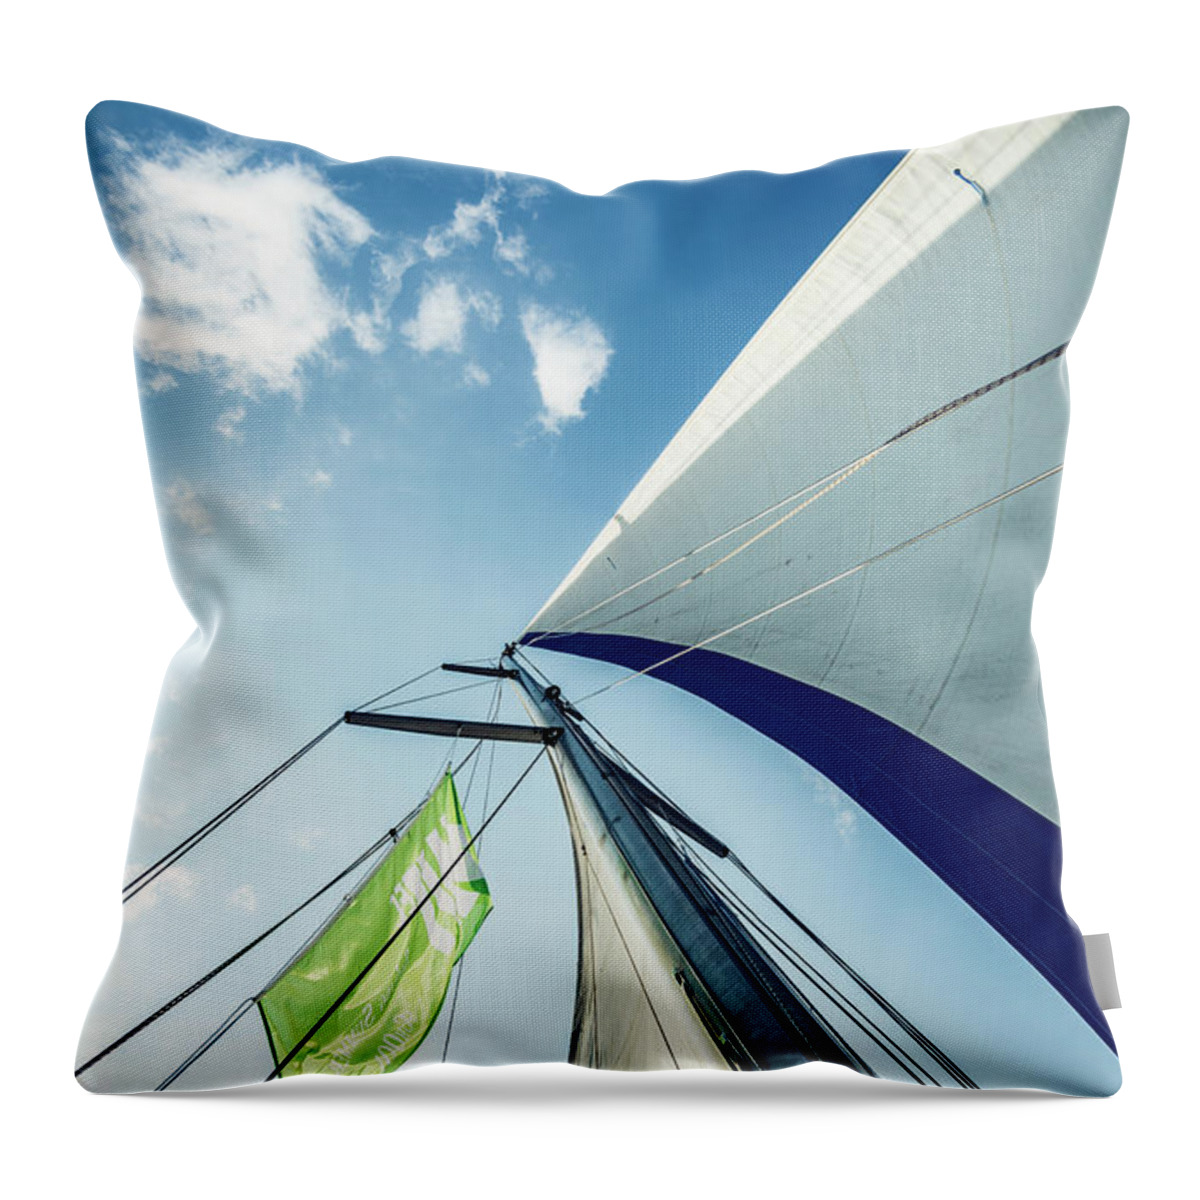 Aegis Throw Pillow featuring the photograph Sky Sailing by Hannes Cmarits